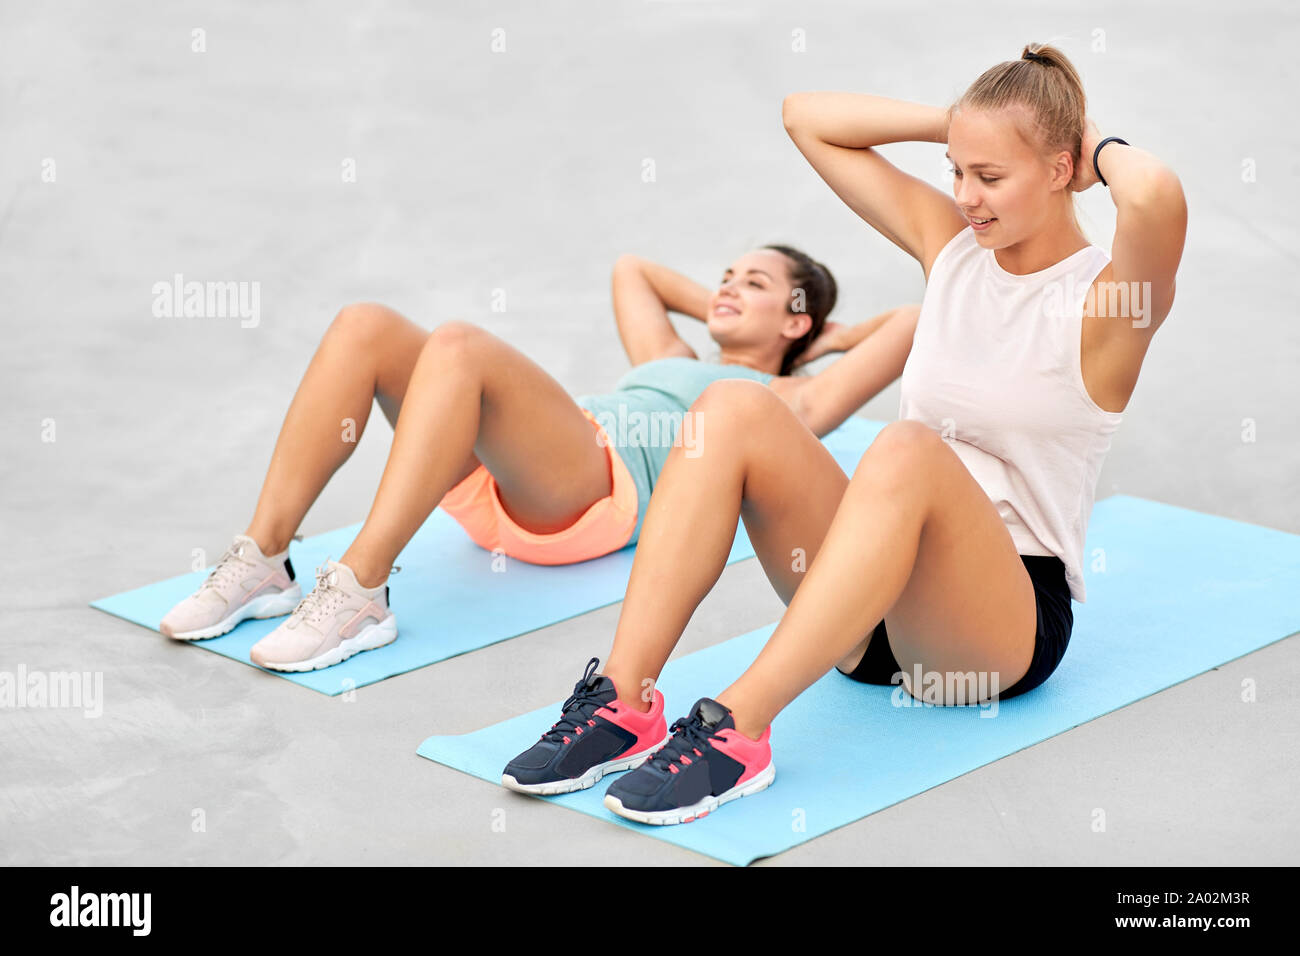 women training and doing sit-ups outdoors Stock Photo